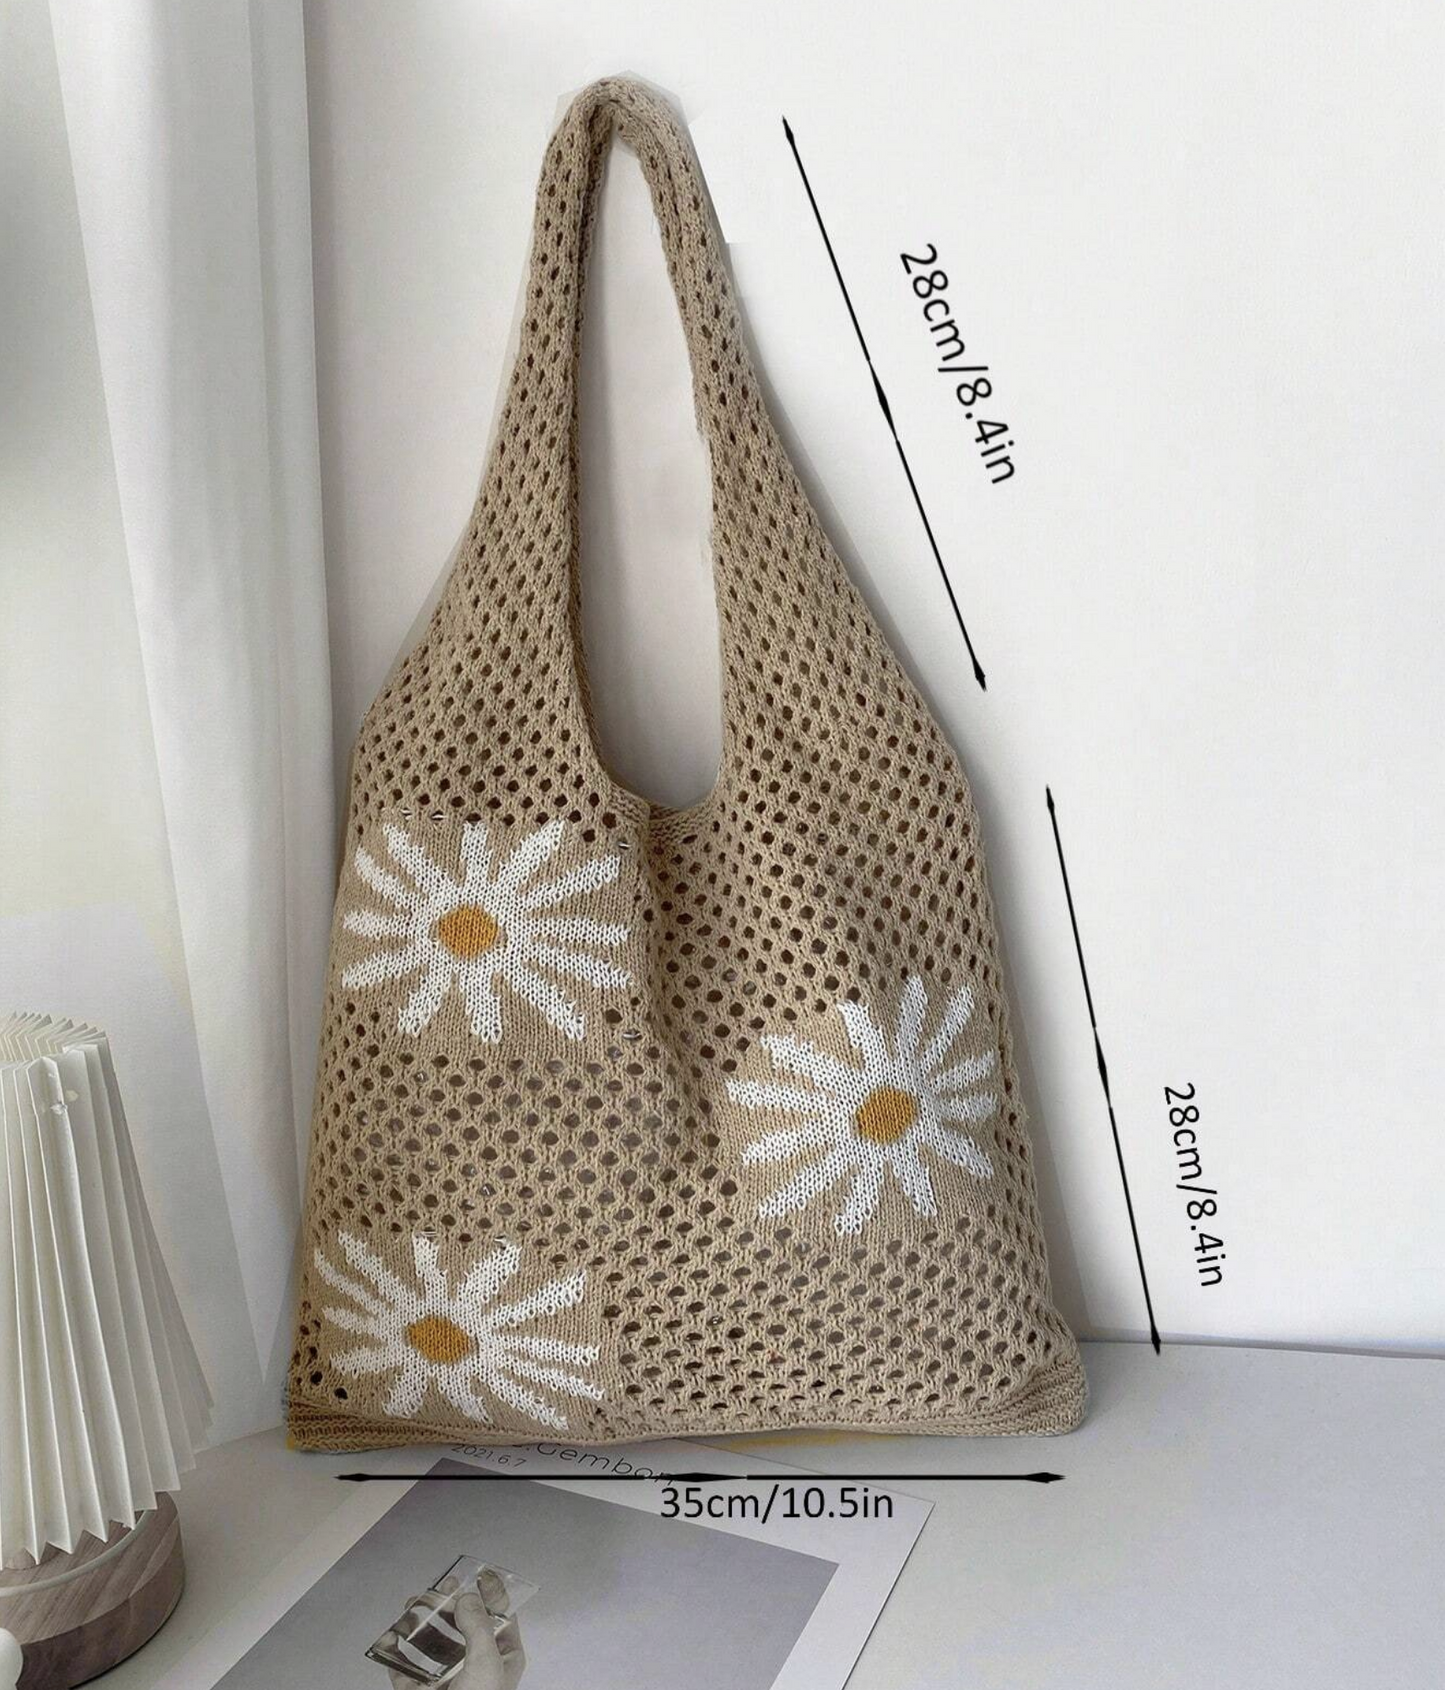 Daisy Crochet Tote Bag | Floral Knit Tote Bag | Coquette Tote Bag | Cute Tote Bag | Bridemaids Gift | Birthday Gift Idea